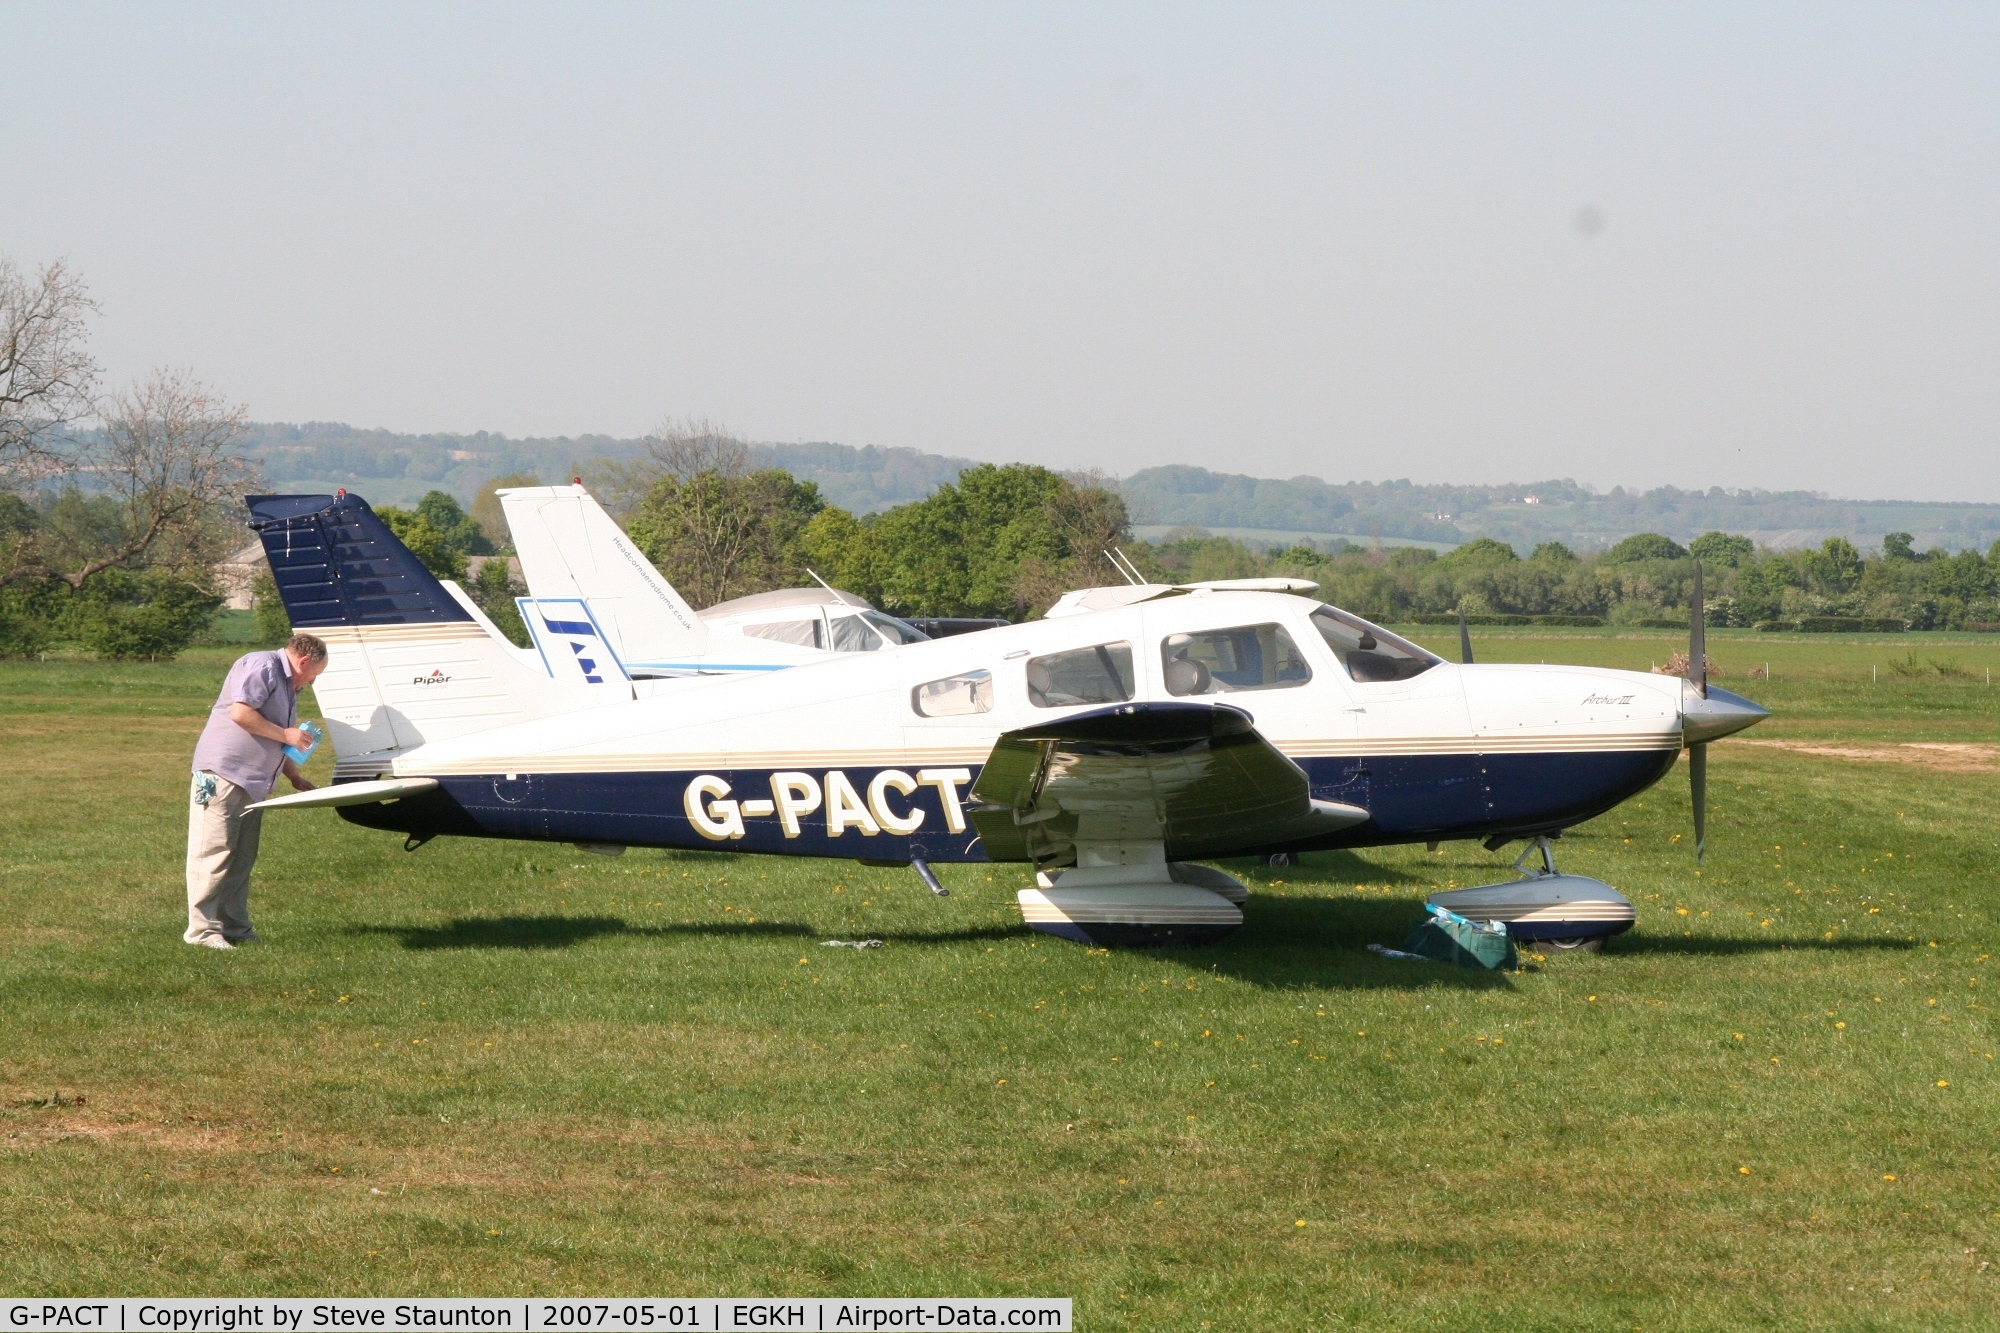 G-PACT, 2003 Piper PA-28-181 Cherokee Archer III C/N 2843546, Taken at Headcorn May 2007